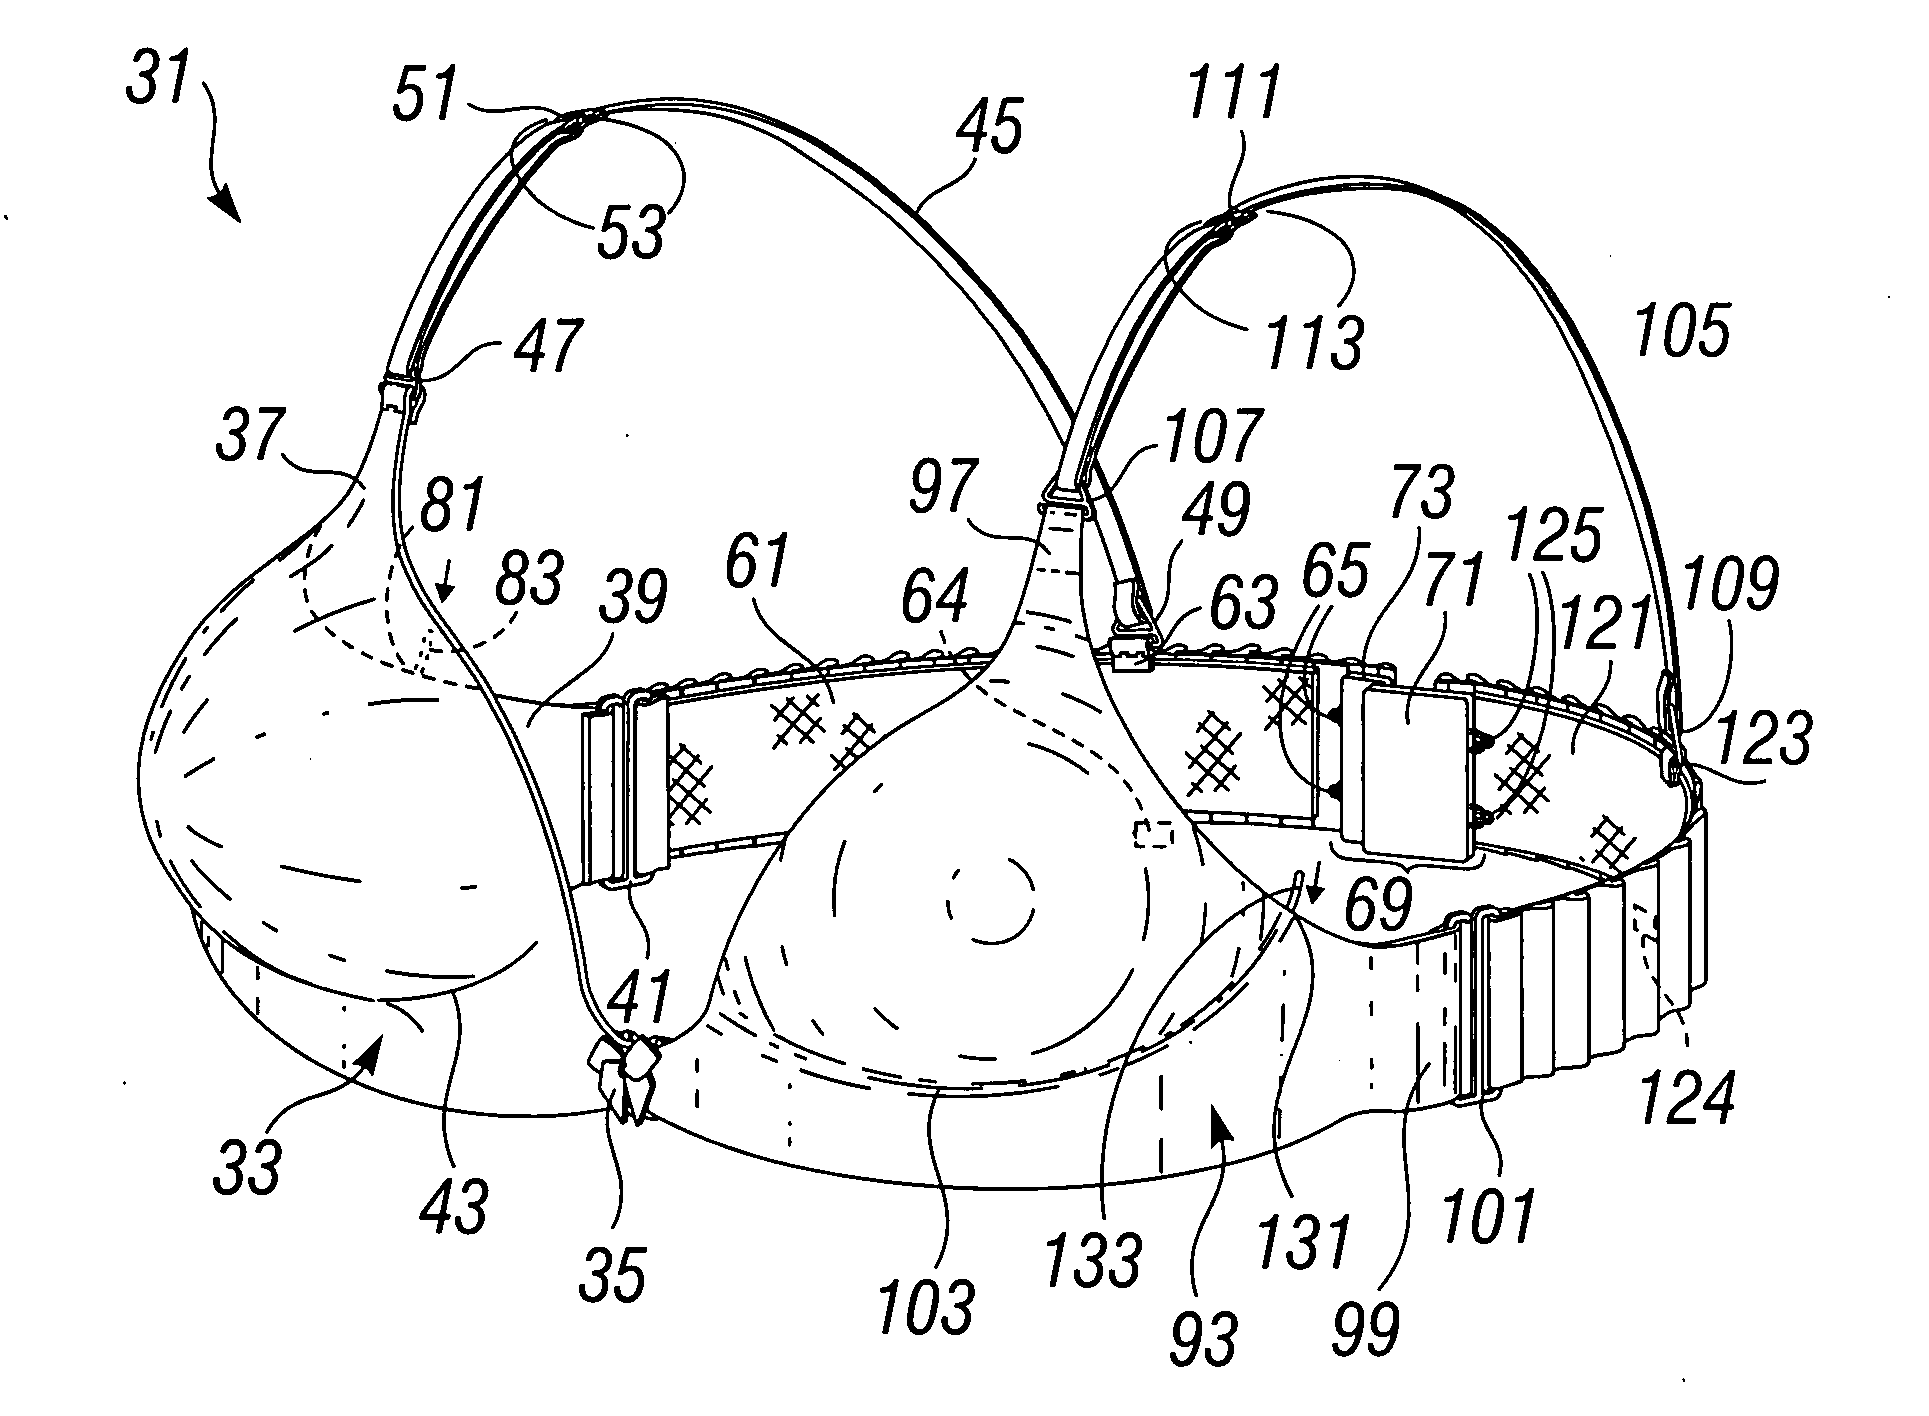 User constructed multi component bra system